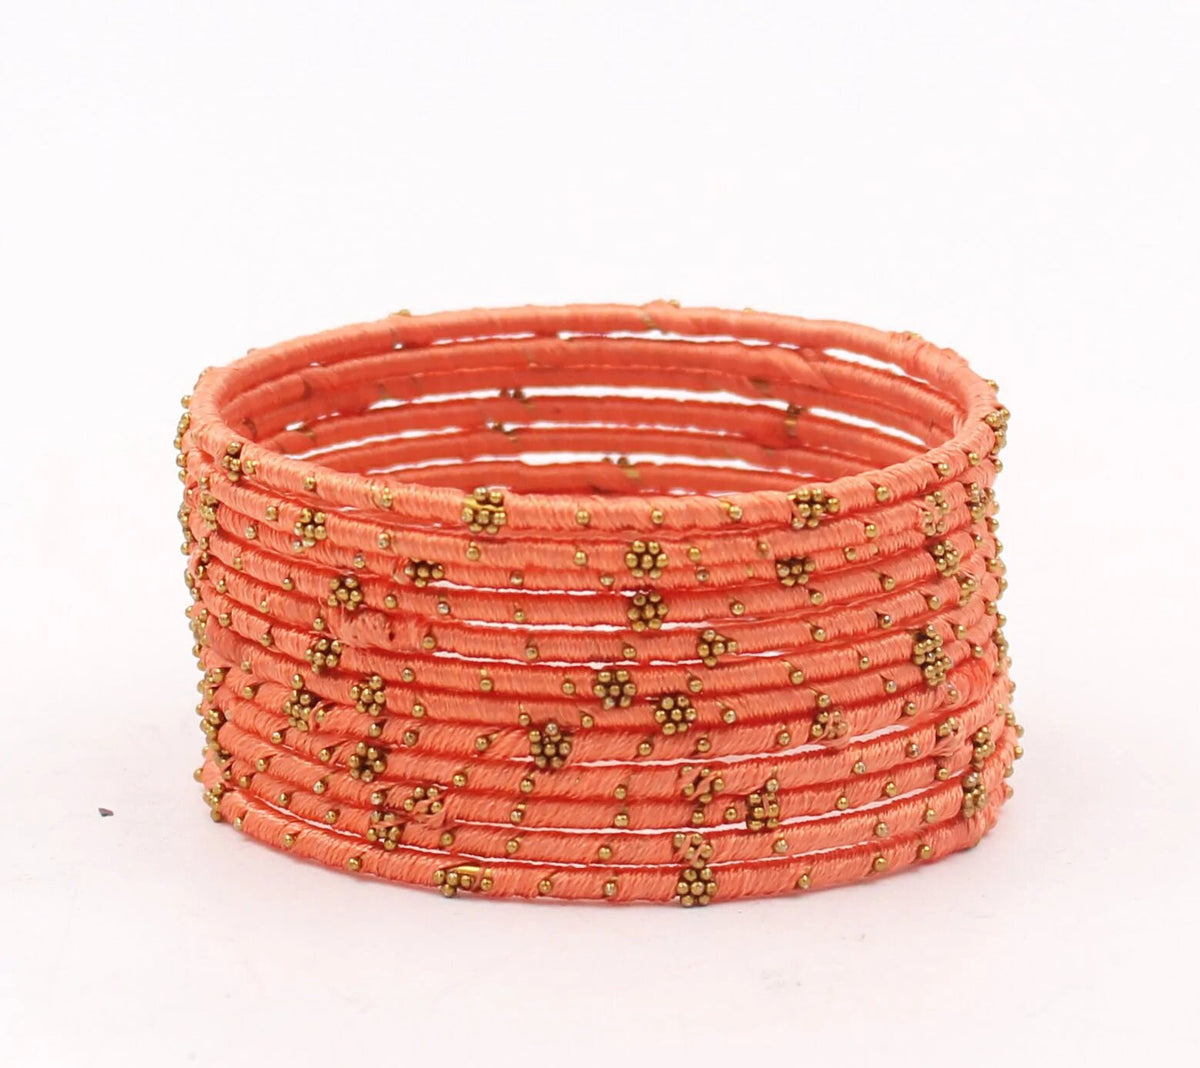 Indian Bangles, 12 Thread Bangles Set Golden Flower, Indian Jewelry, Bridal Bangles for Women, Indian Bangles, Bollywood Jewelry